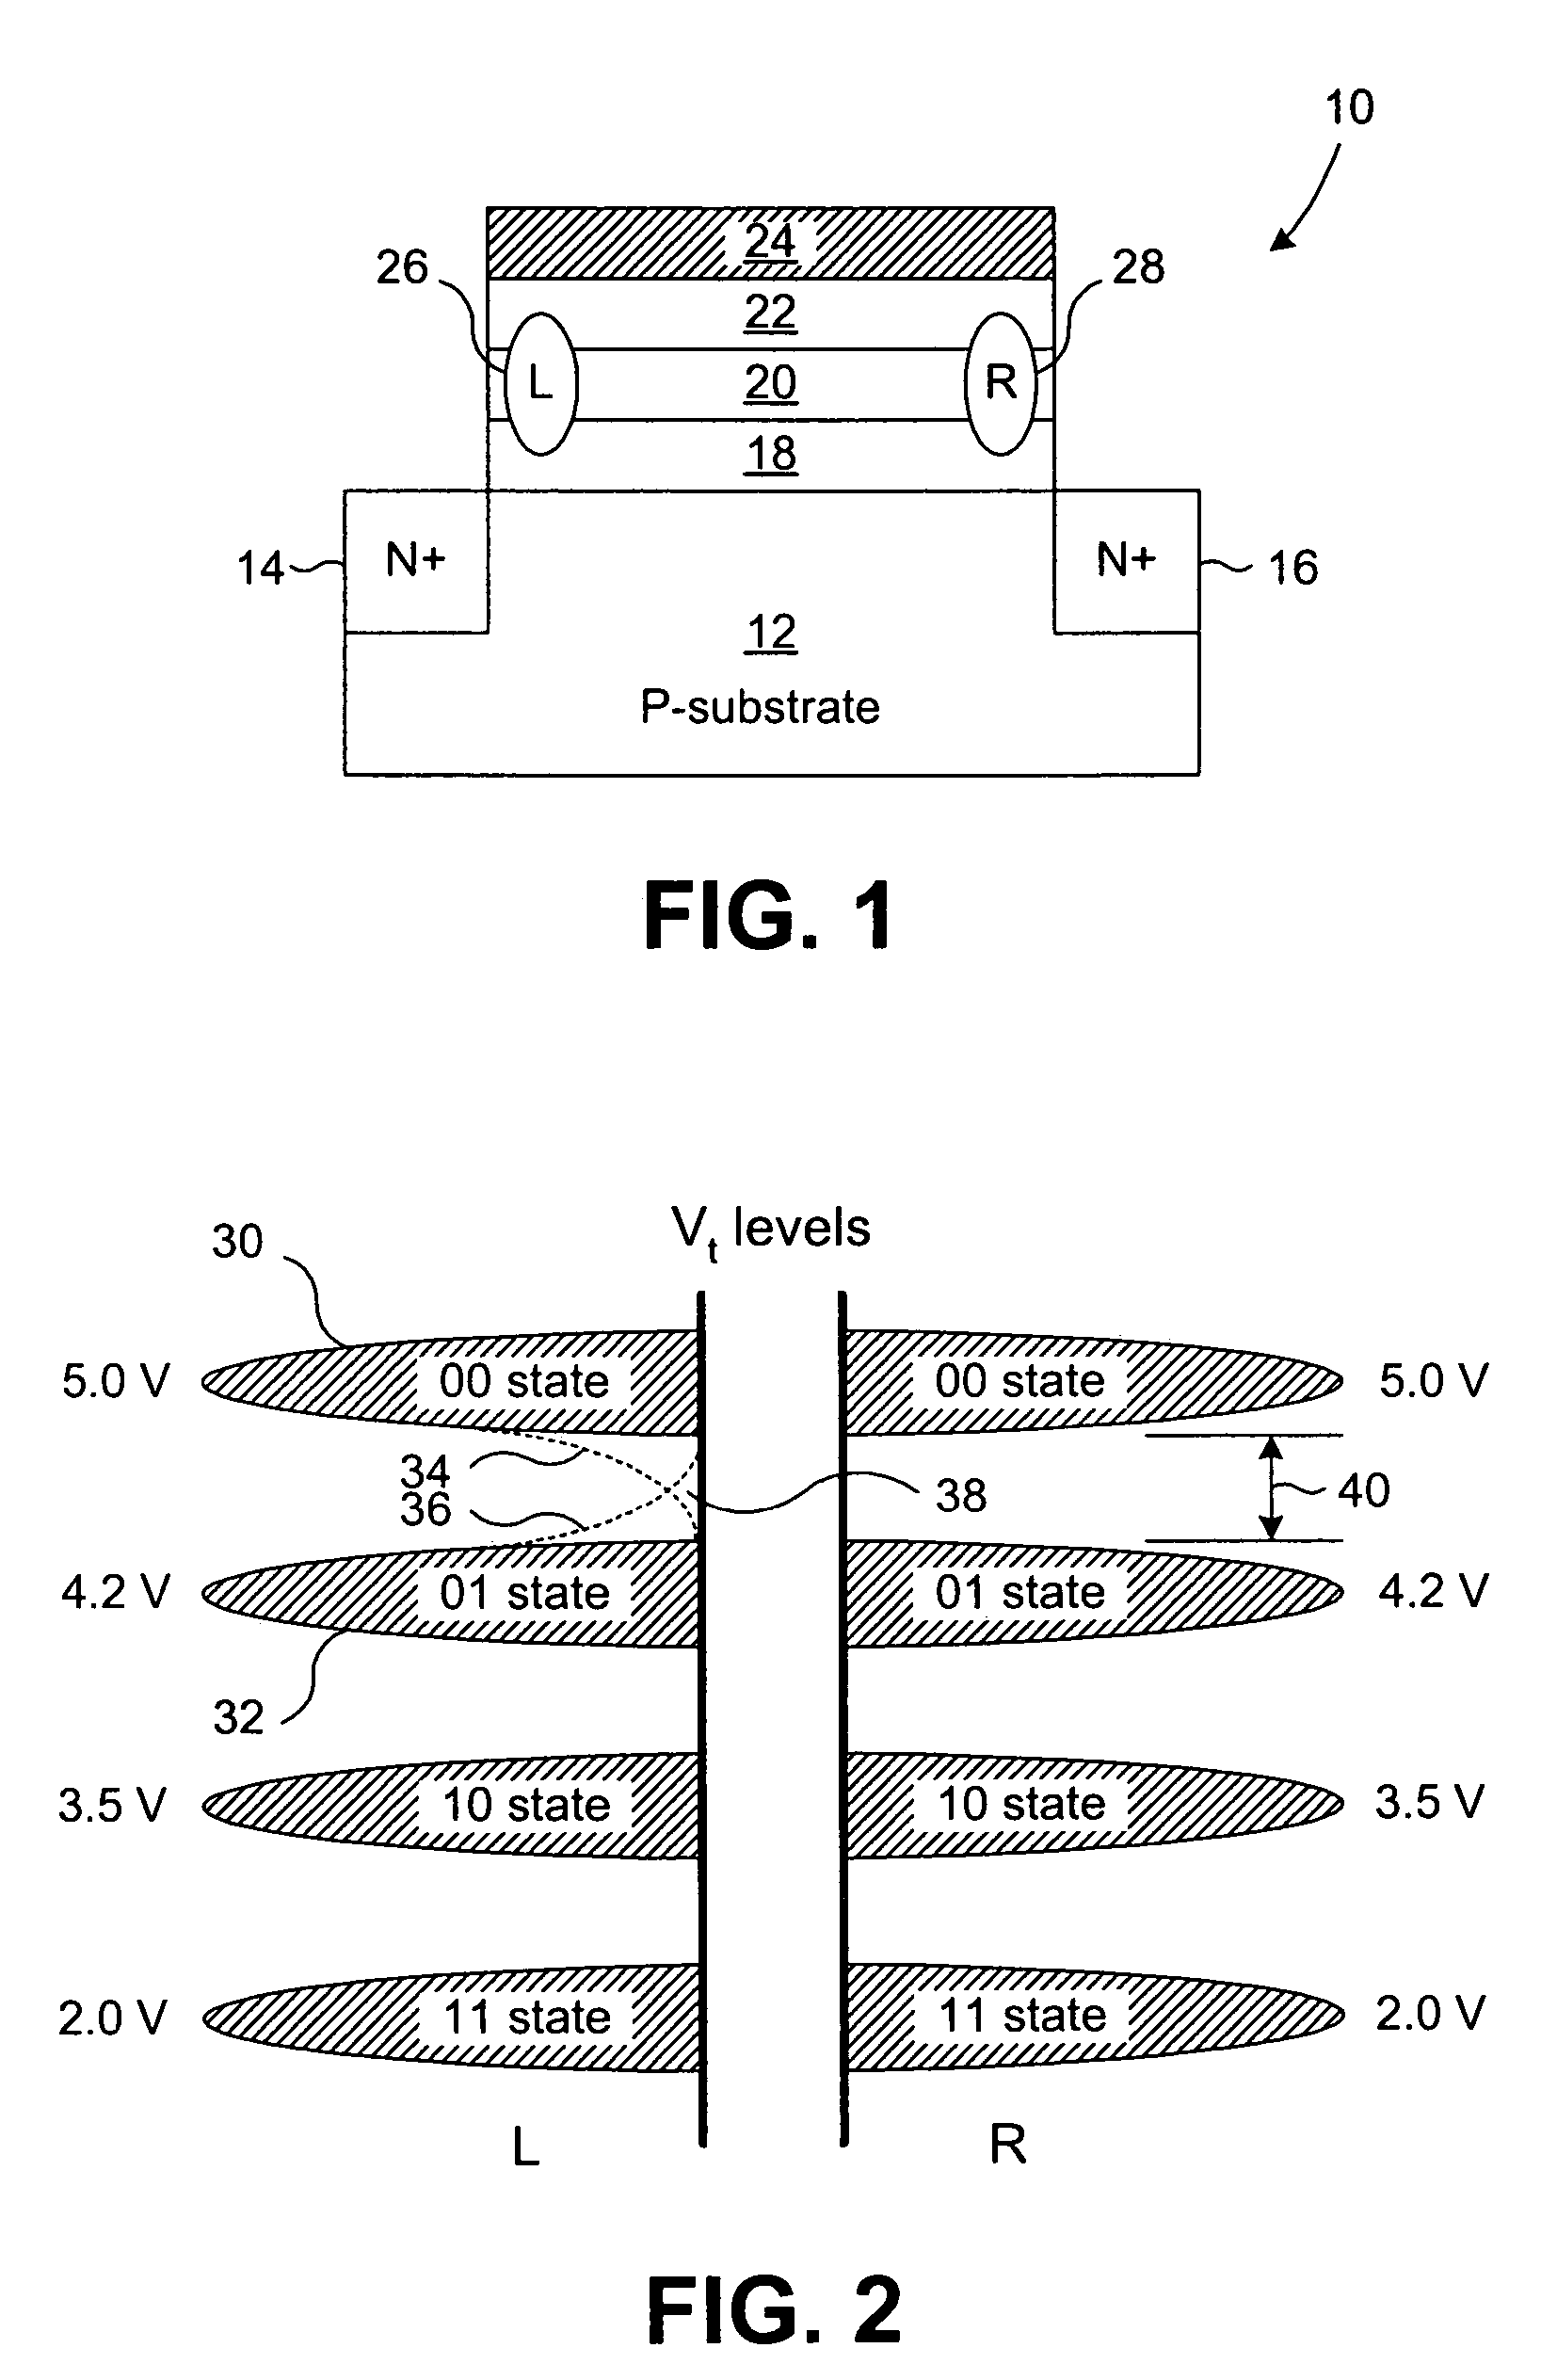 Method of dynamically controlling program verify levels in multilevel memory cells